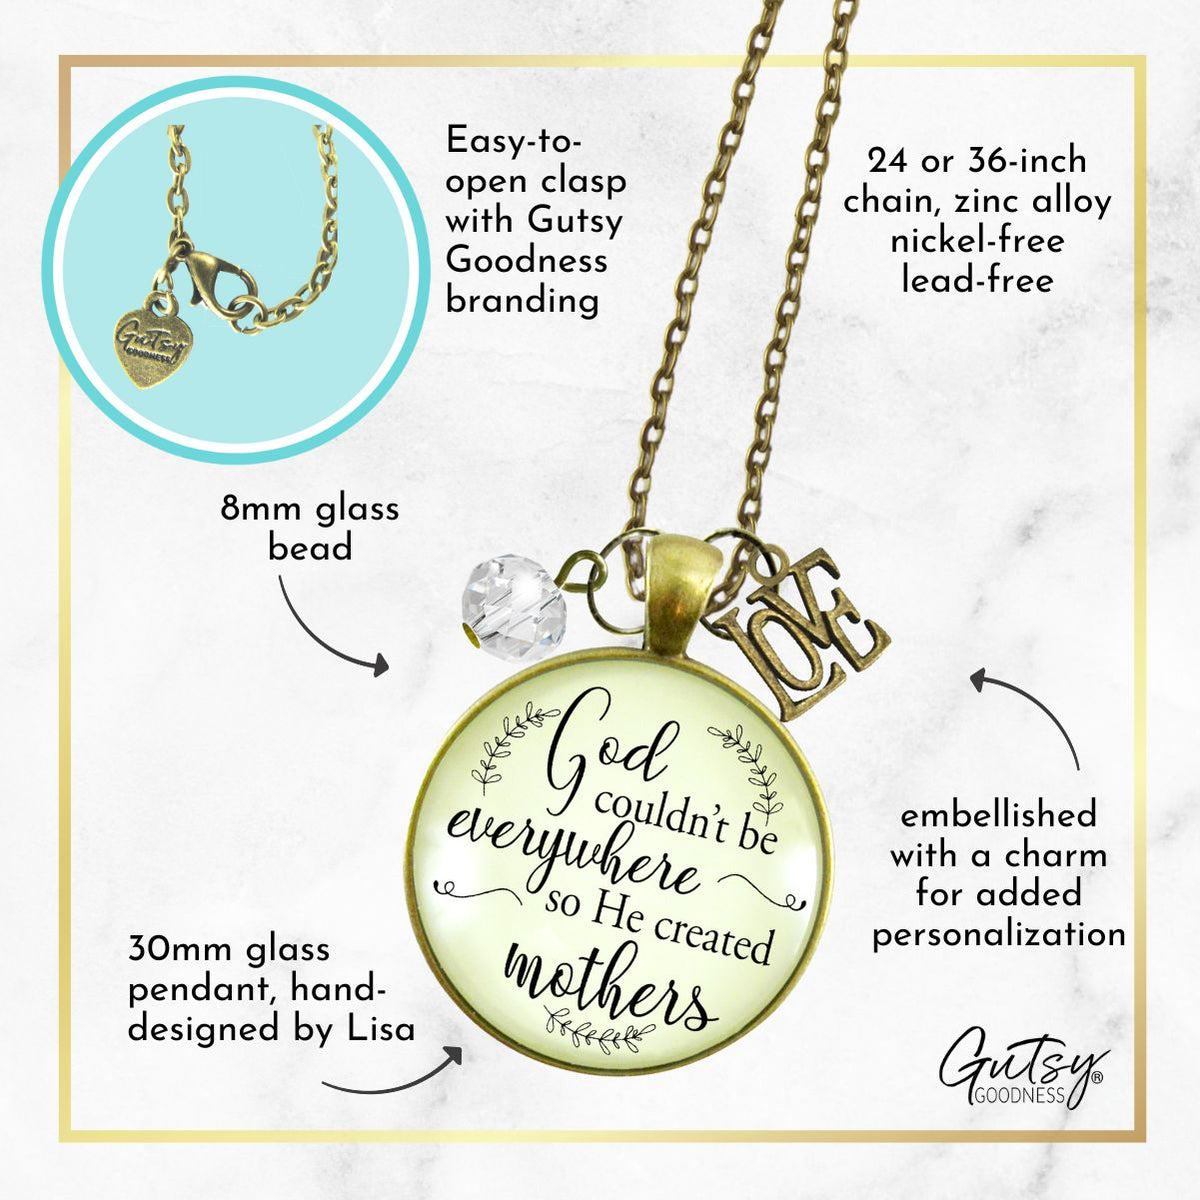 Blessed Mom Necklace God Couldn't Be Everywhere Christian Jewelry